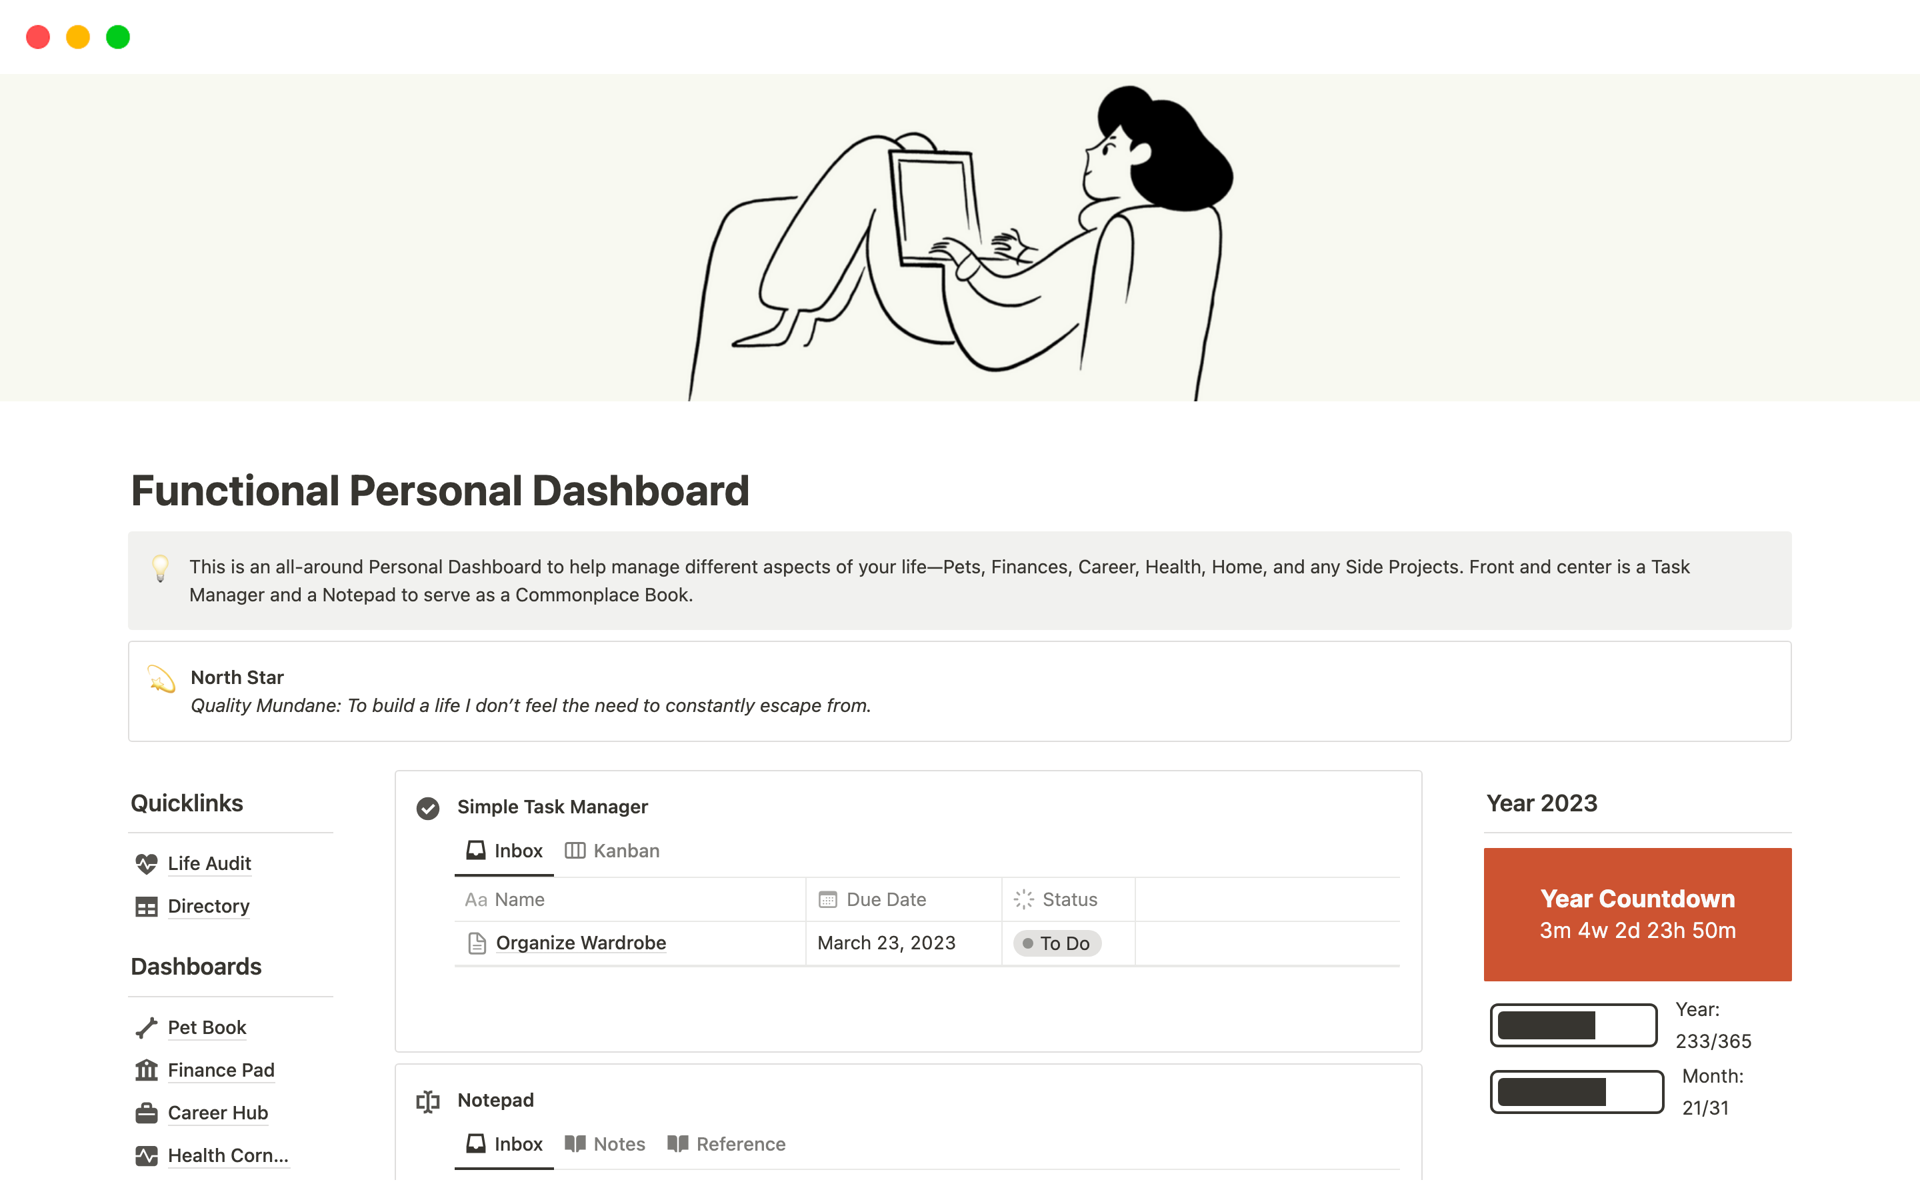 This is an all-around Personal Dashboard to help manage different aspects of your life—Pets, Finances, Career, Health, Home, and any Side Projects.